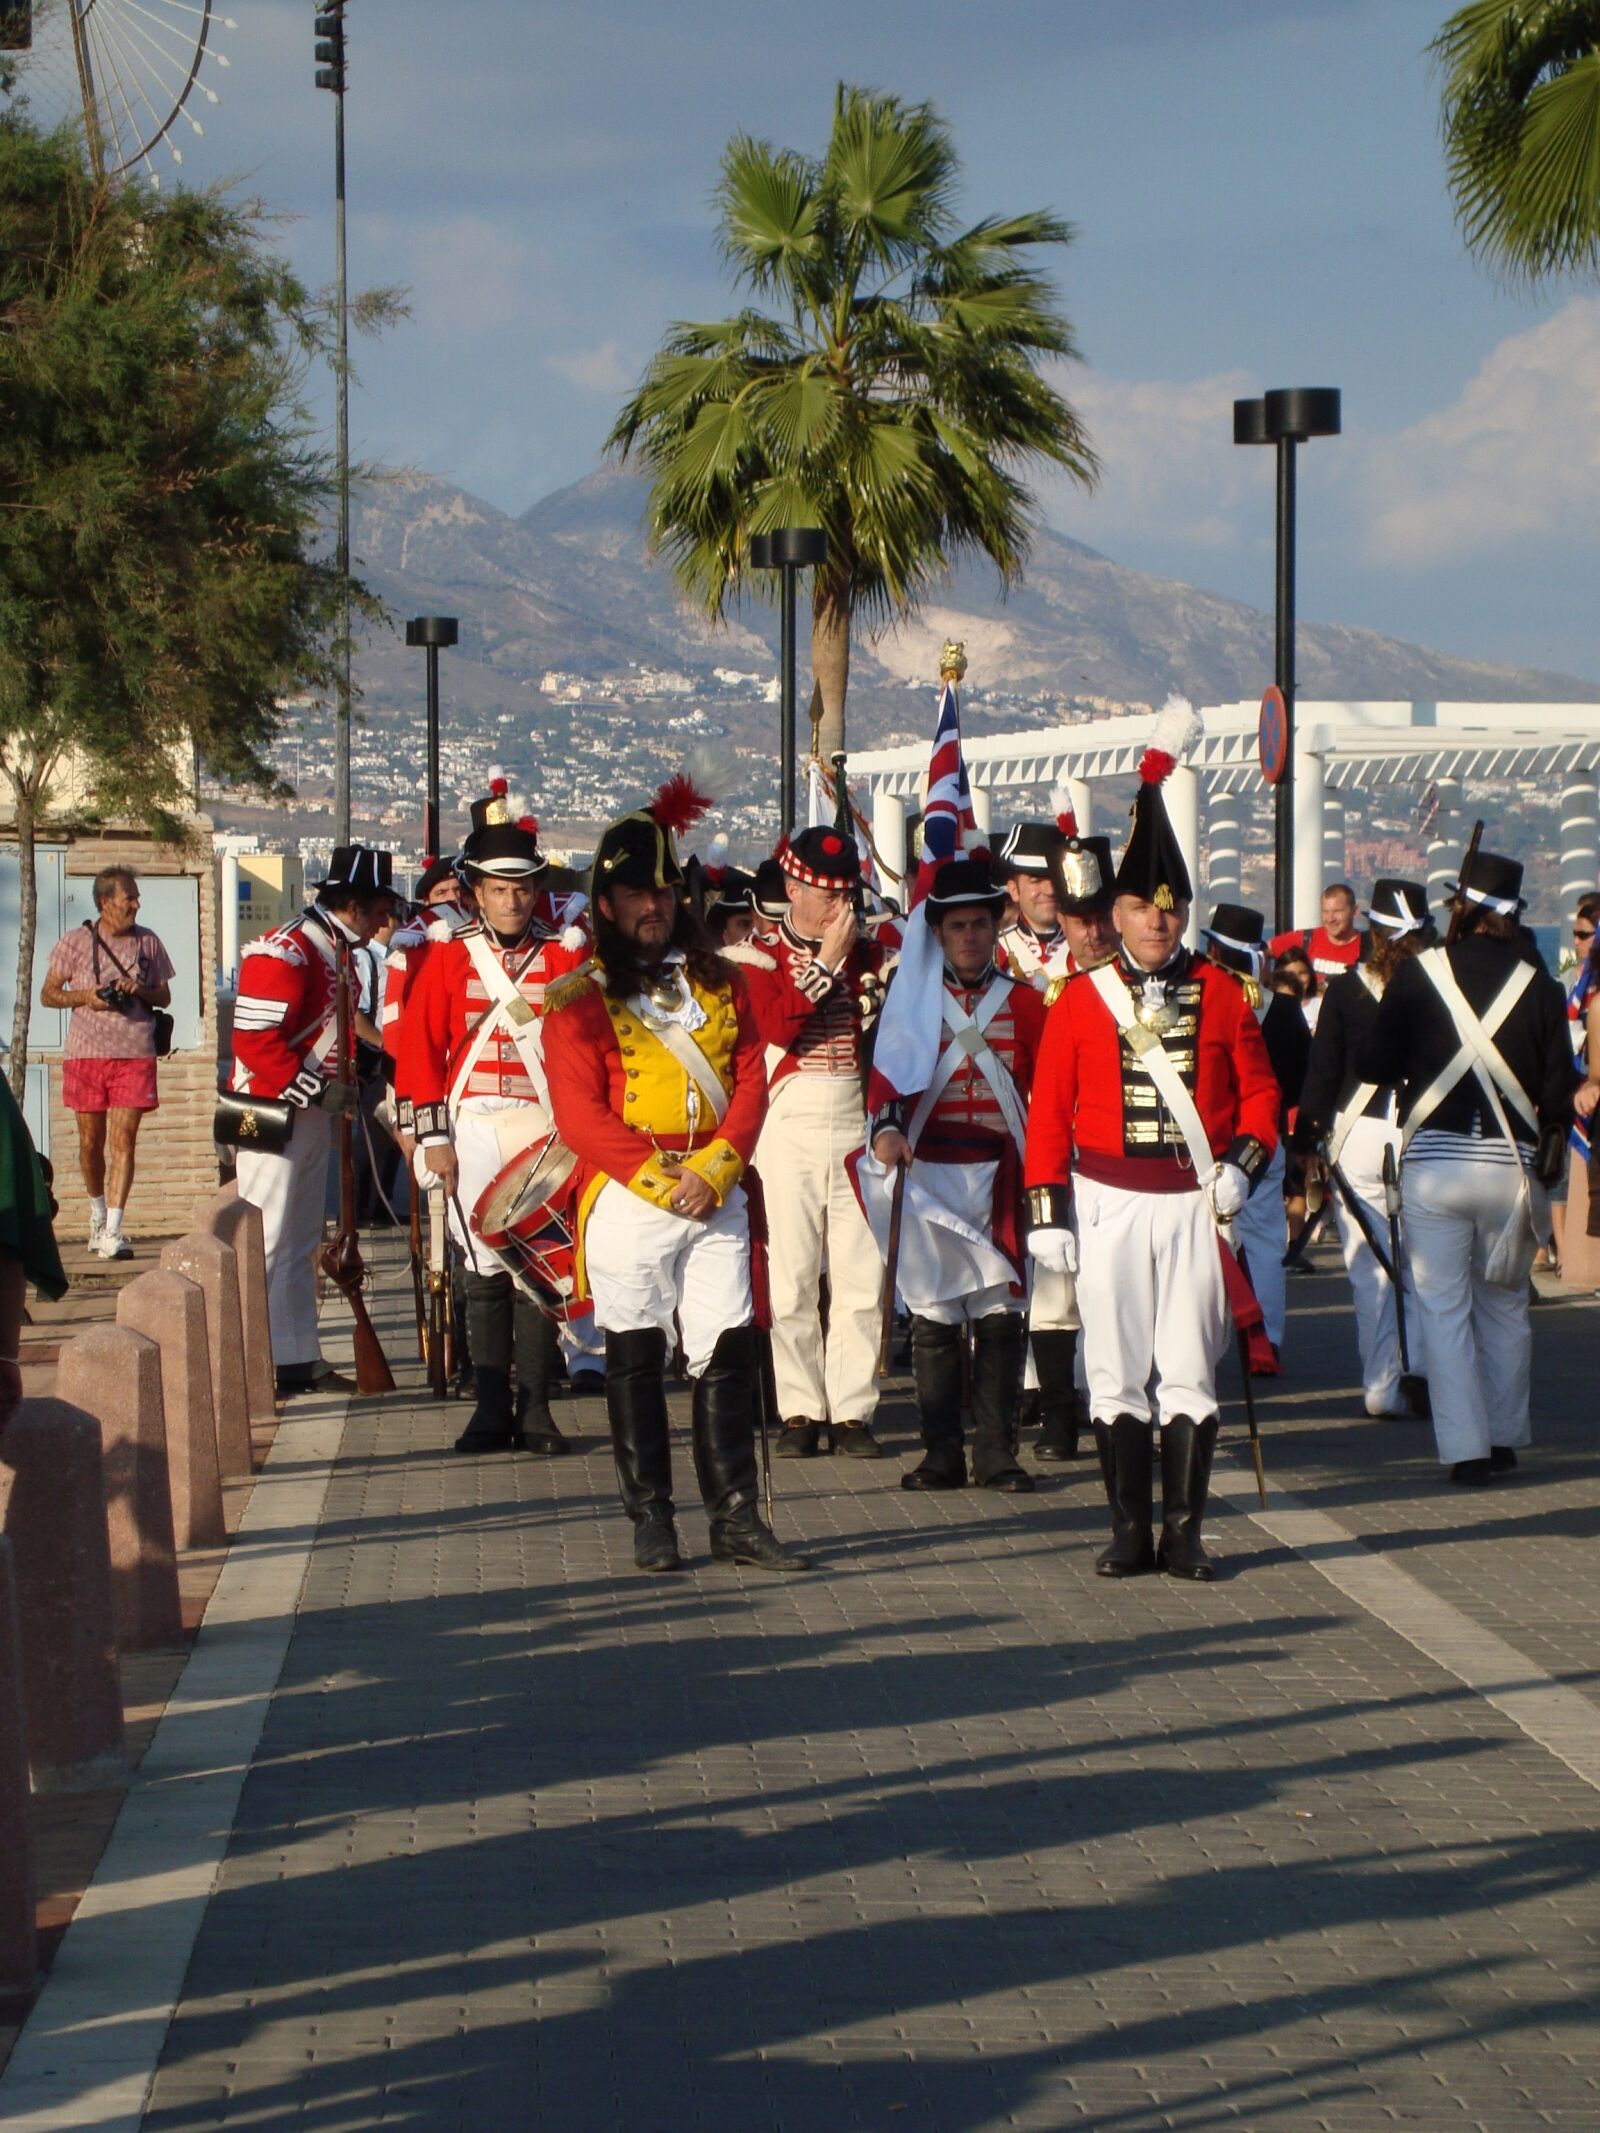 Sony Cyber-shot DSC-W120 sample photo. Soldiers marching malaga spain photography